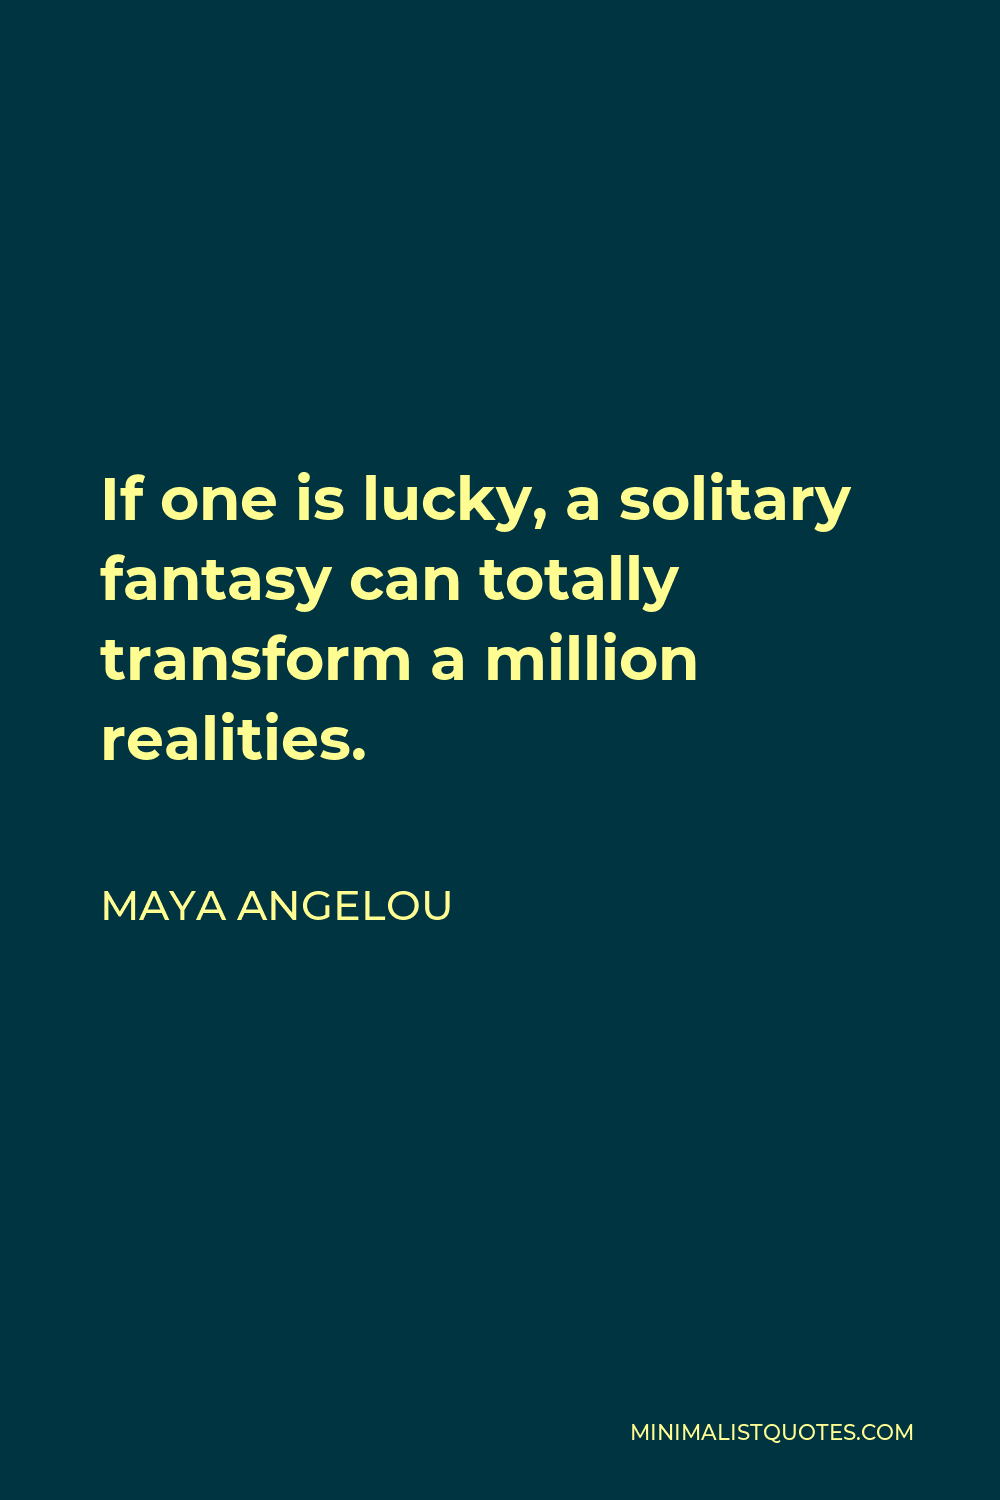 Maya Angelou Quote - If one is lucky, a solitary fantasy can totally transform a million realities.